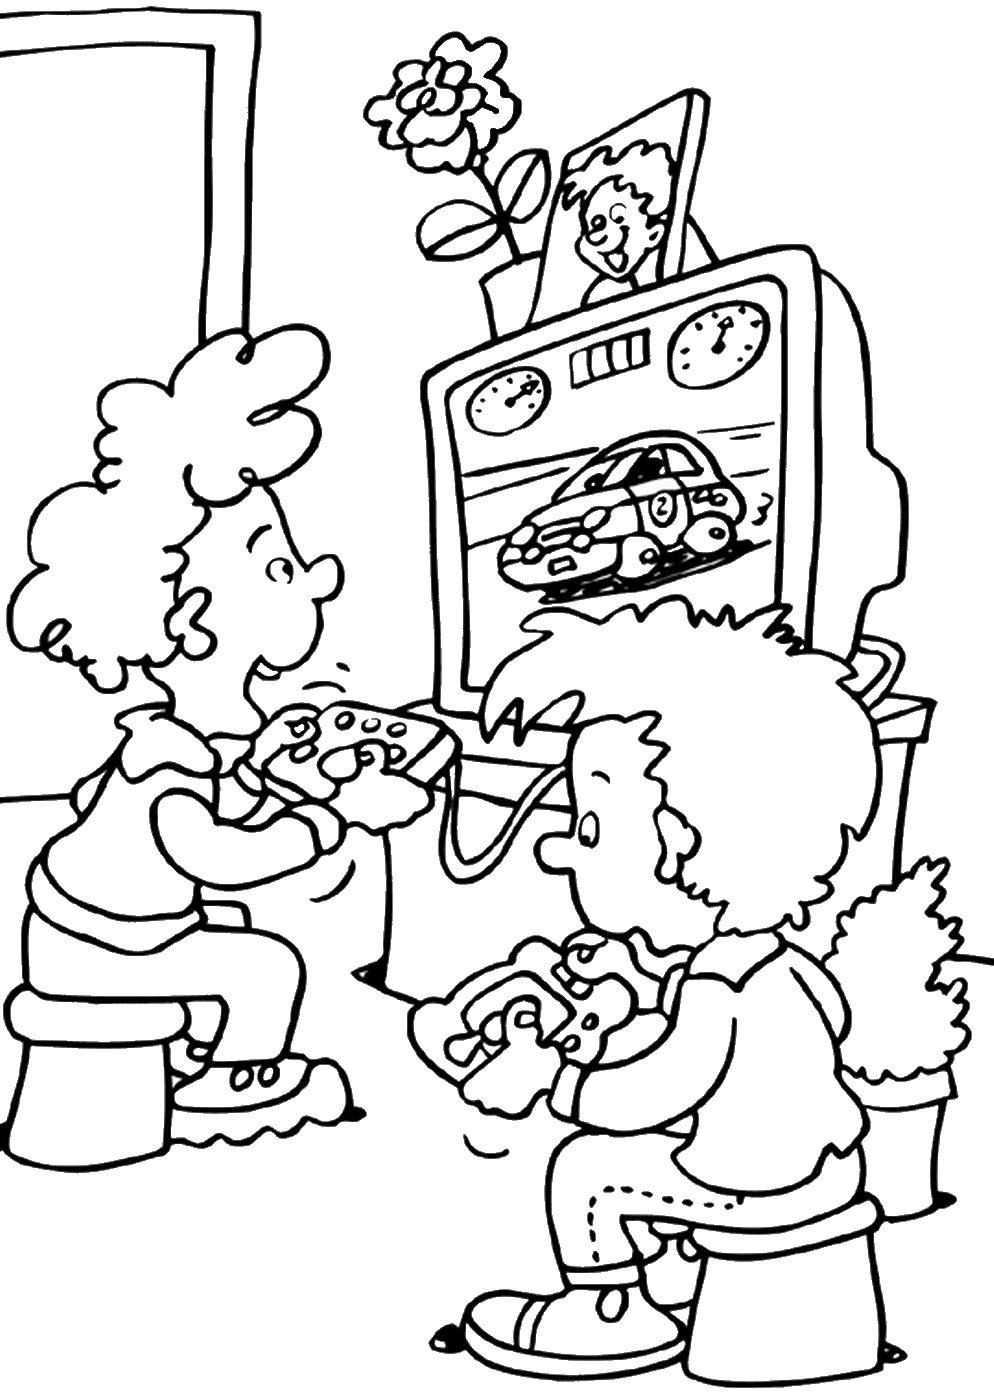 Computer Coloring Pages computer_cl_37 Printable 2021 1854 Coloring4free